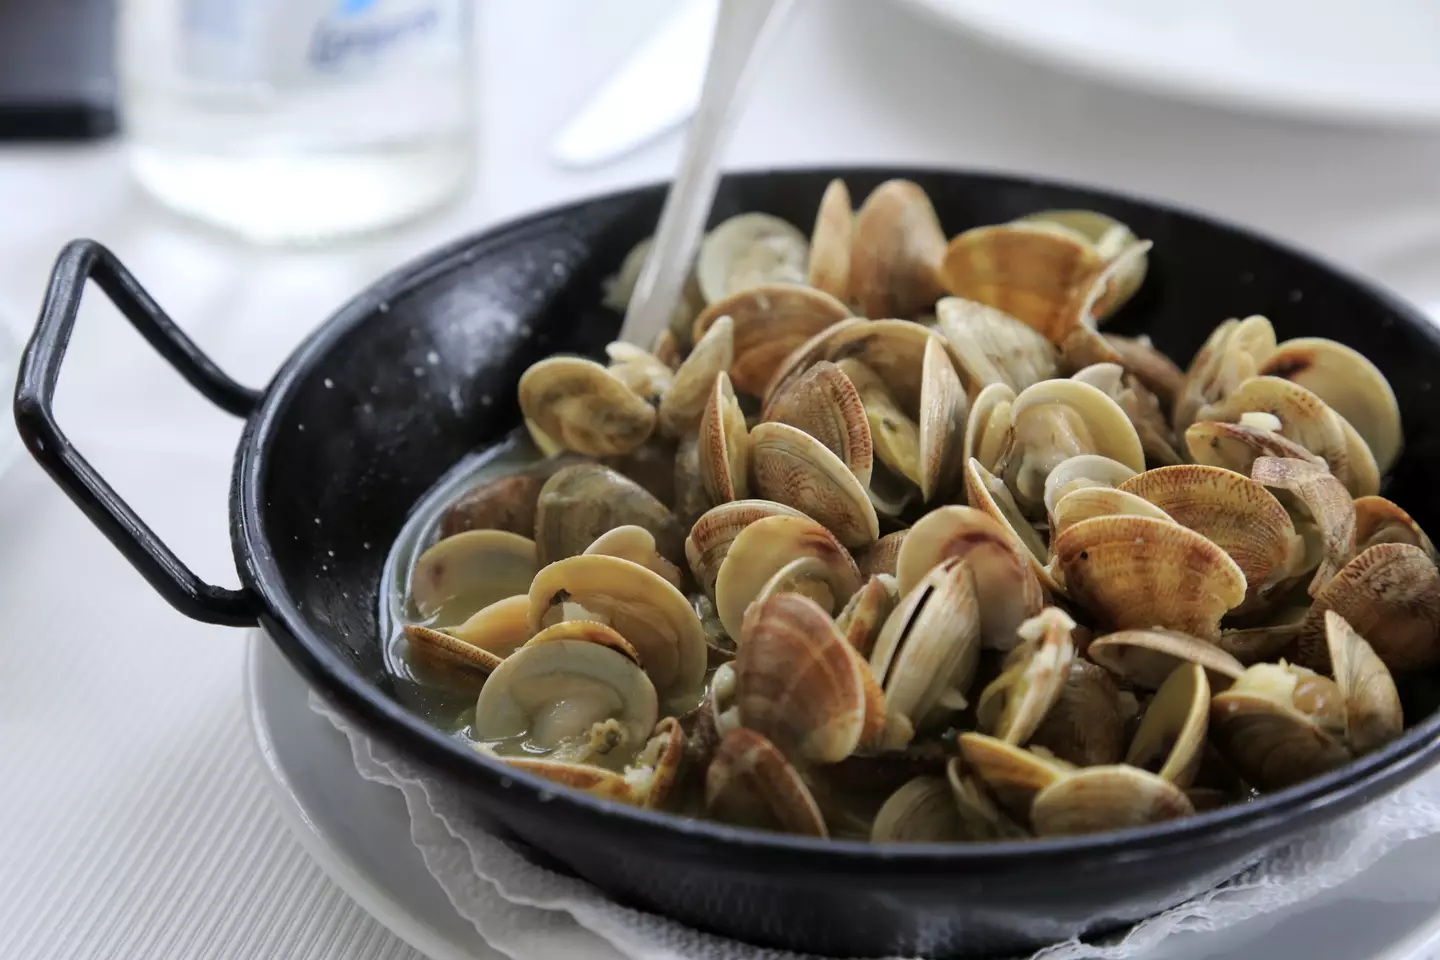 The chef served his guests raw clams, which were later discovered to have been infected by norovirus.